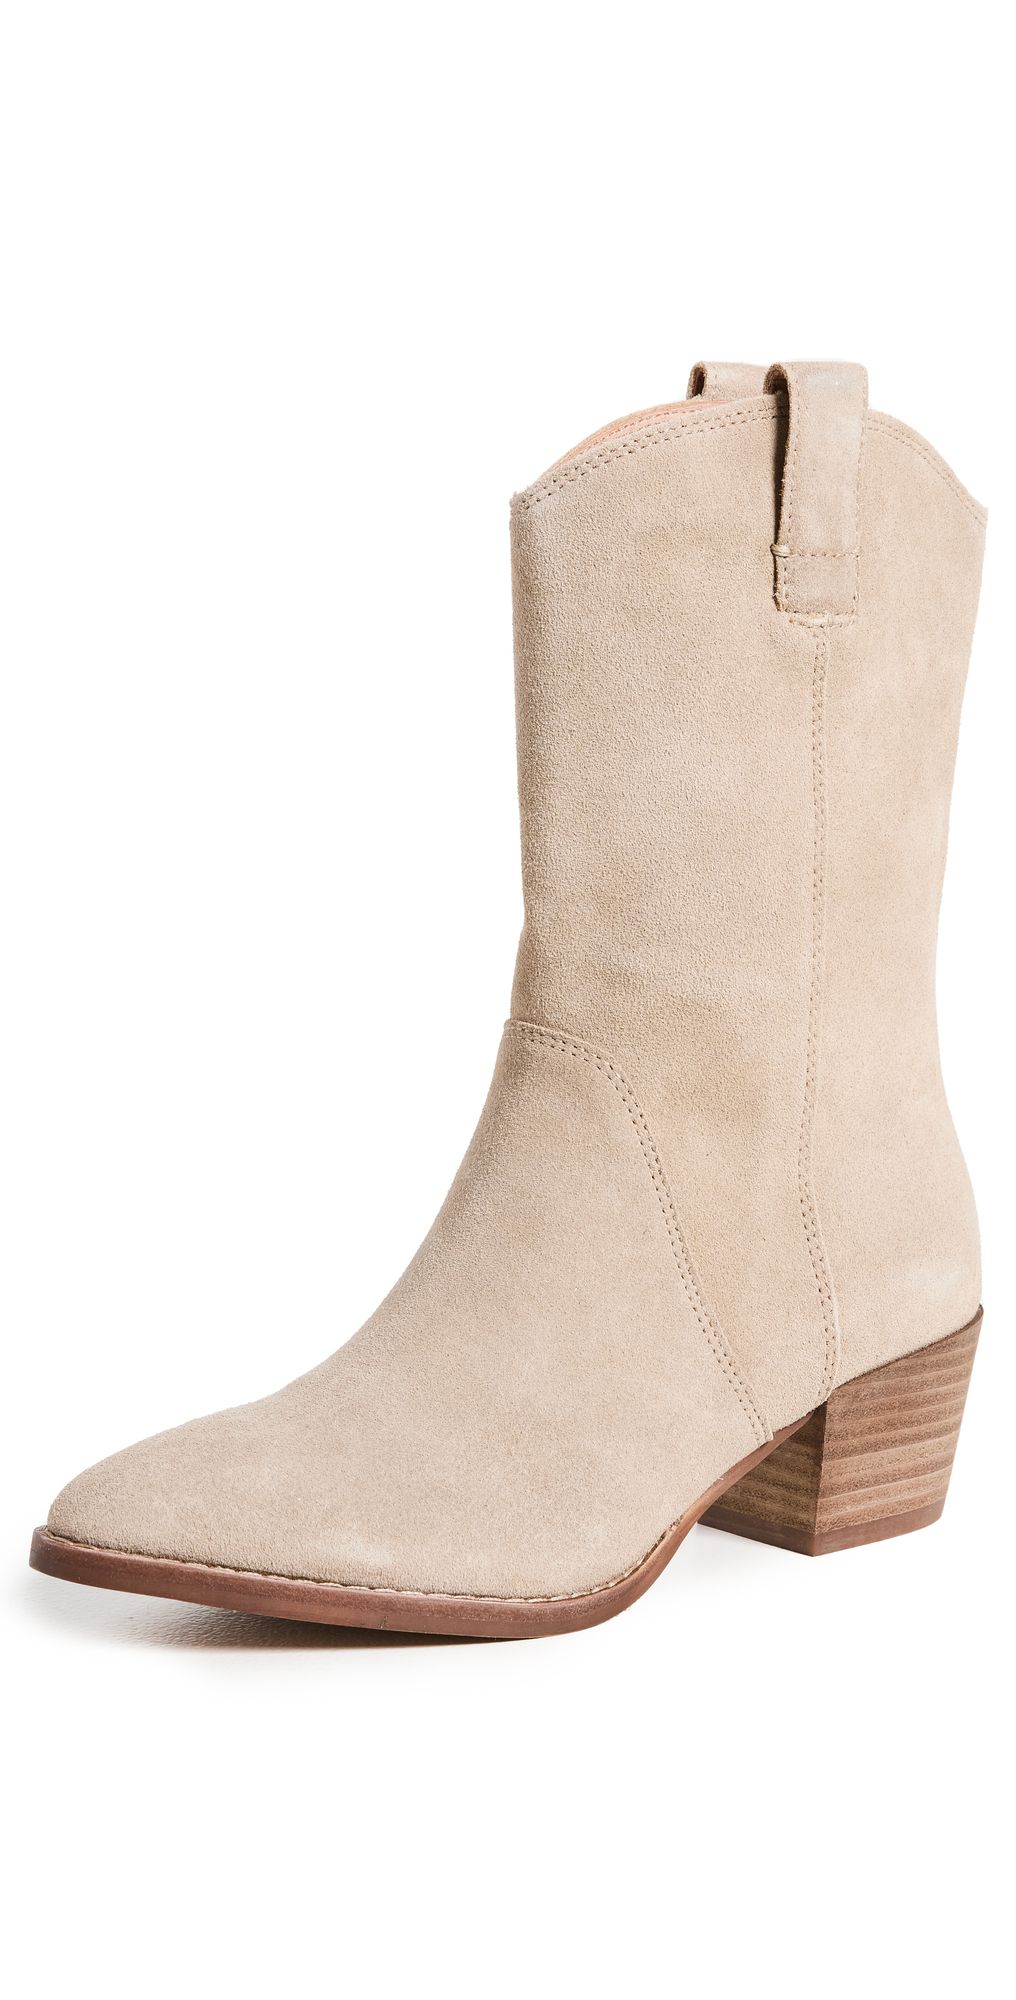 Madewell The Cassity Tall Western Boots | Shopbop